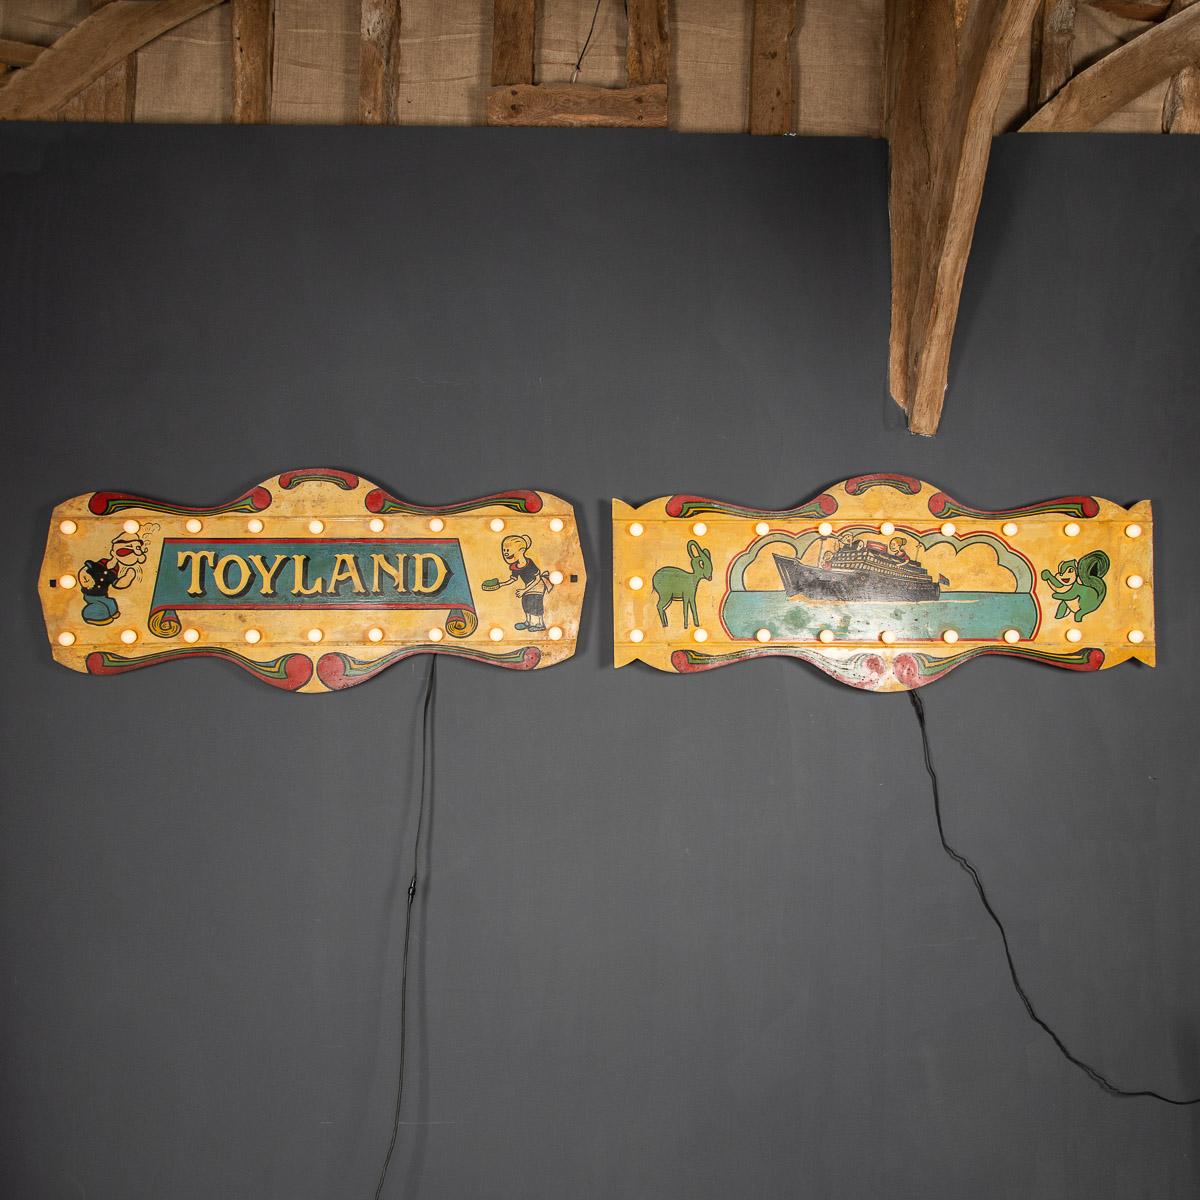 Antique 20th century pair of metal painted fairground signs. Each sign is illuminated with twenty bulbs and have been adapted to hang on the wall. A real conversation piece.

Condition
In great condition - wear as expected.

Size
Width: